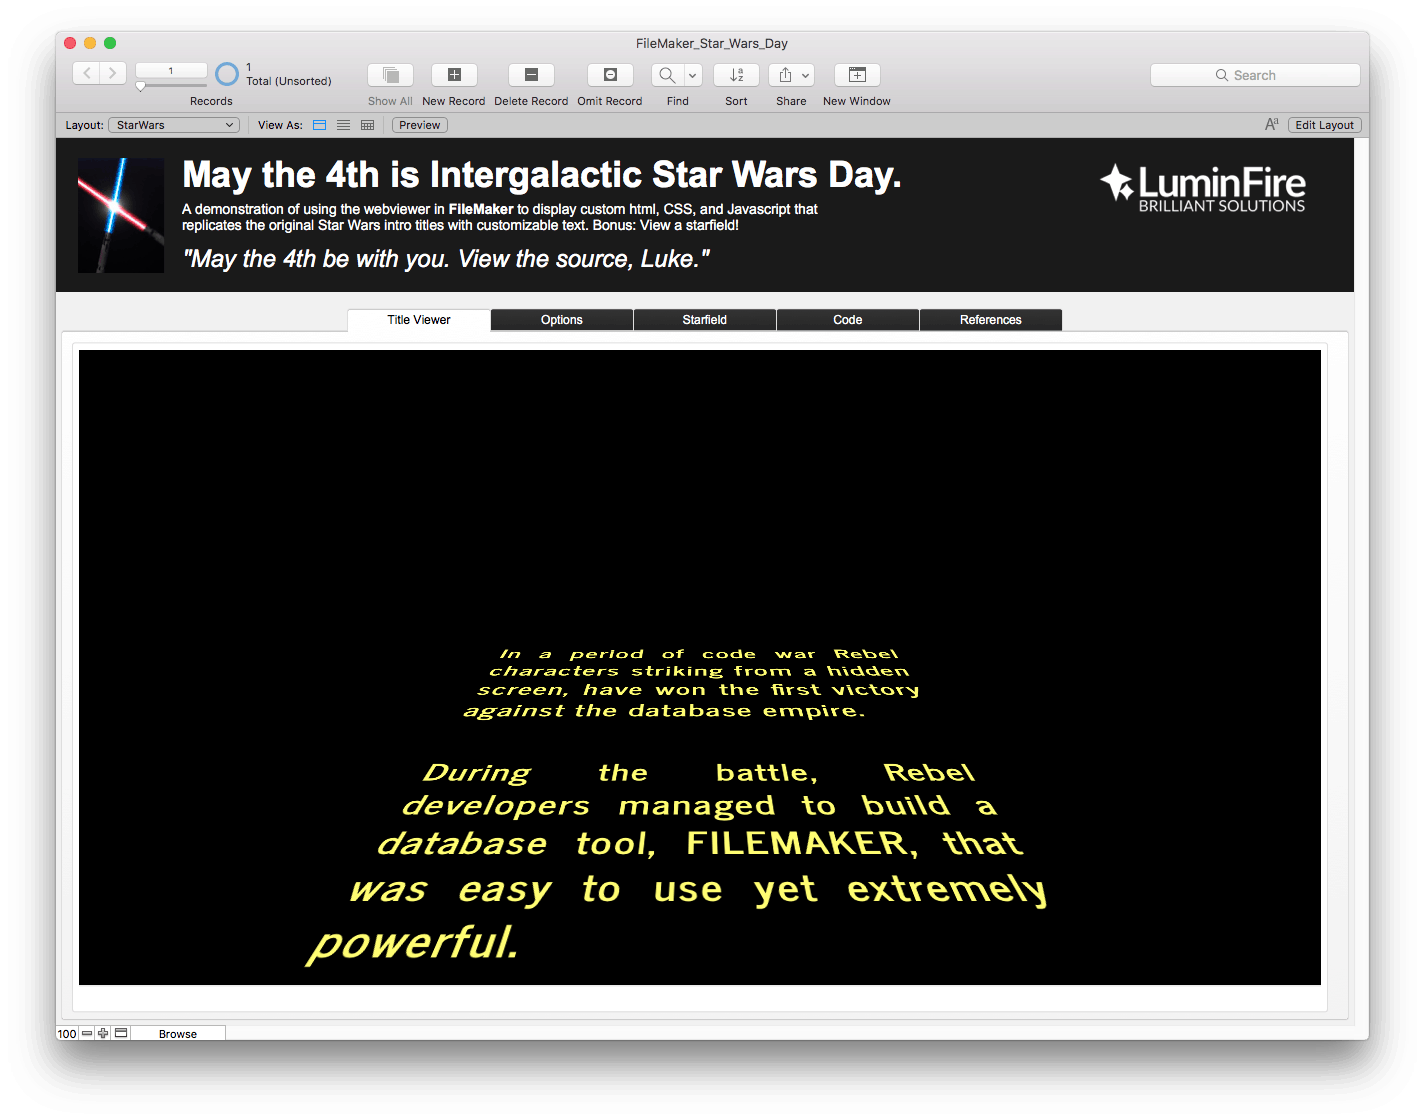 Intergalactic Star Wars Day and FileMaker